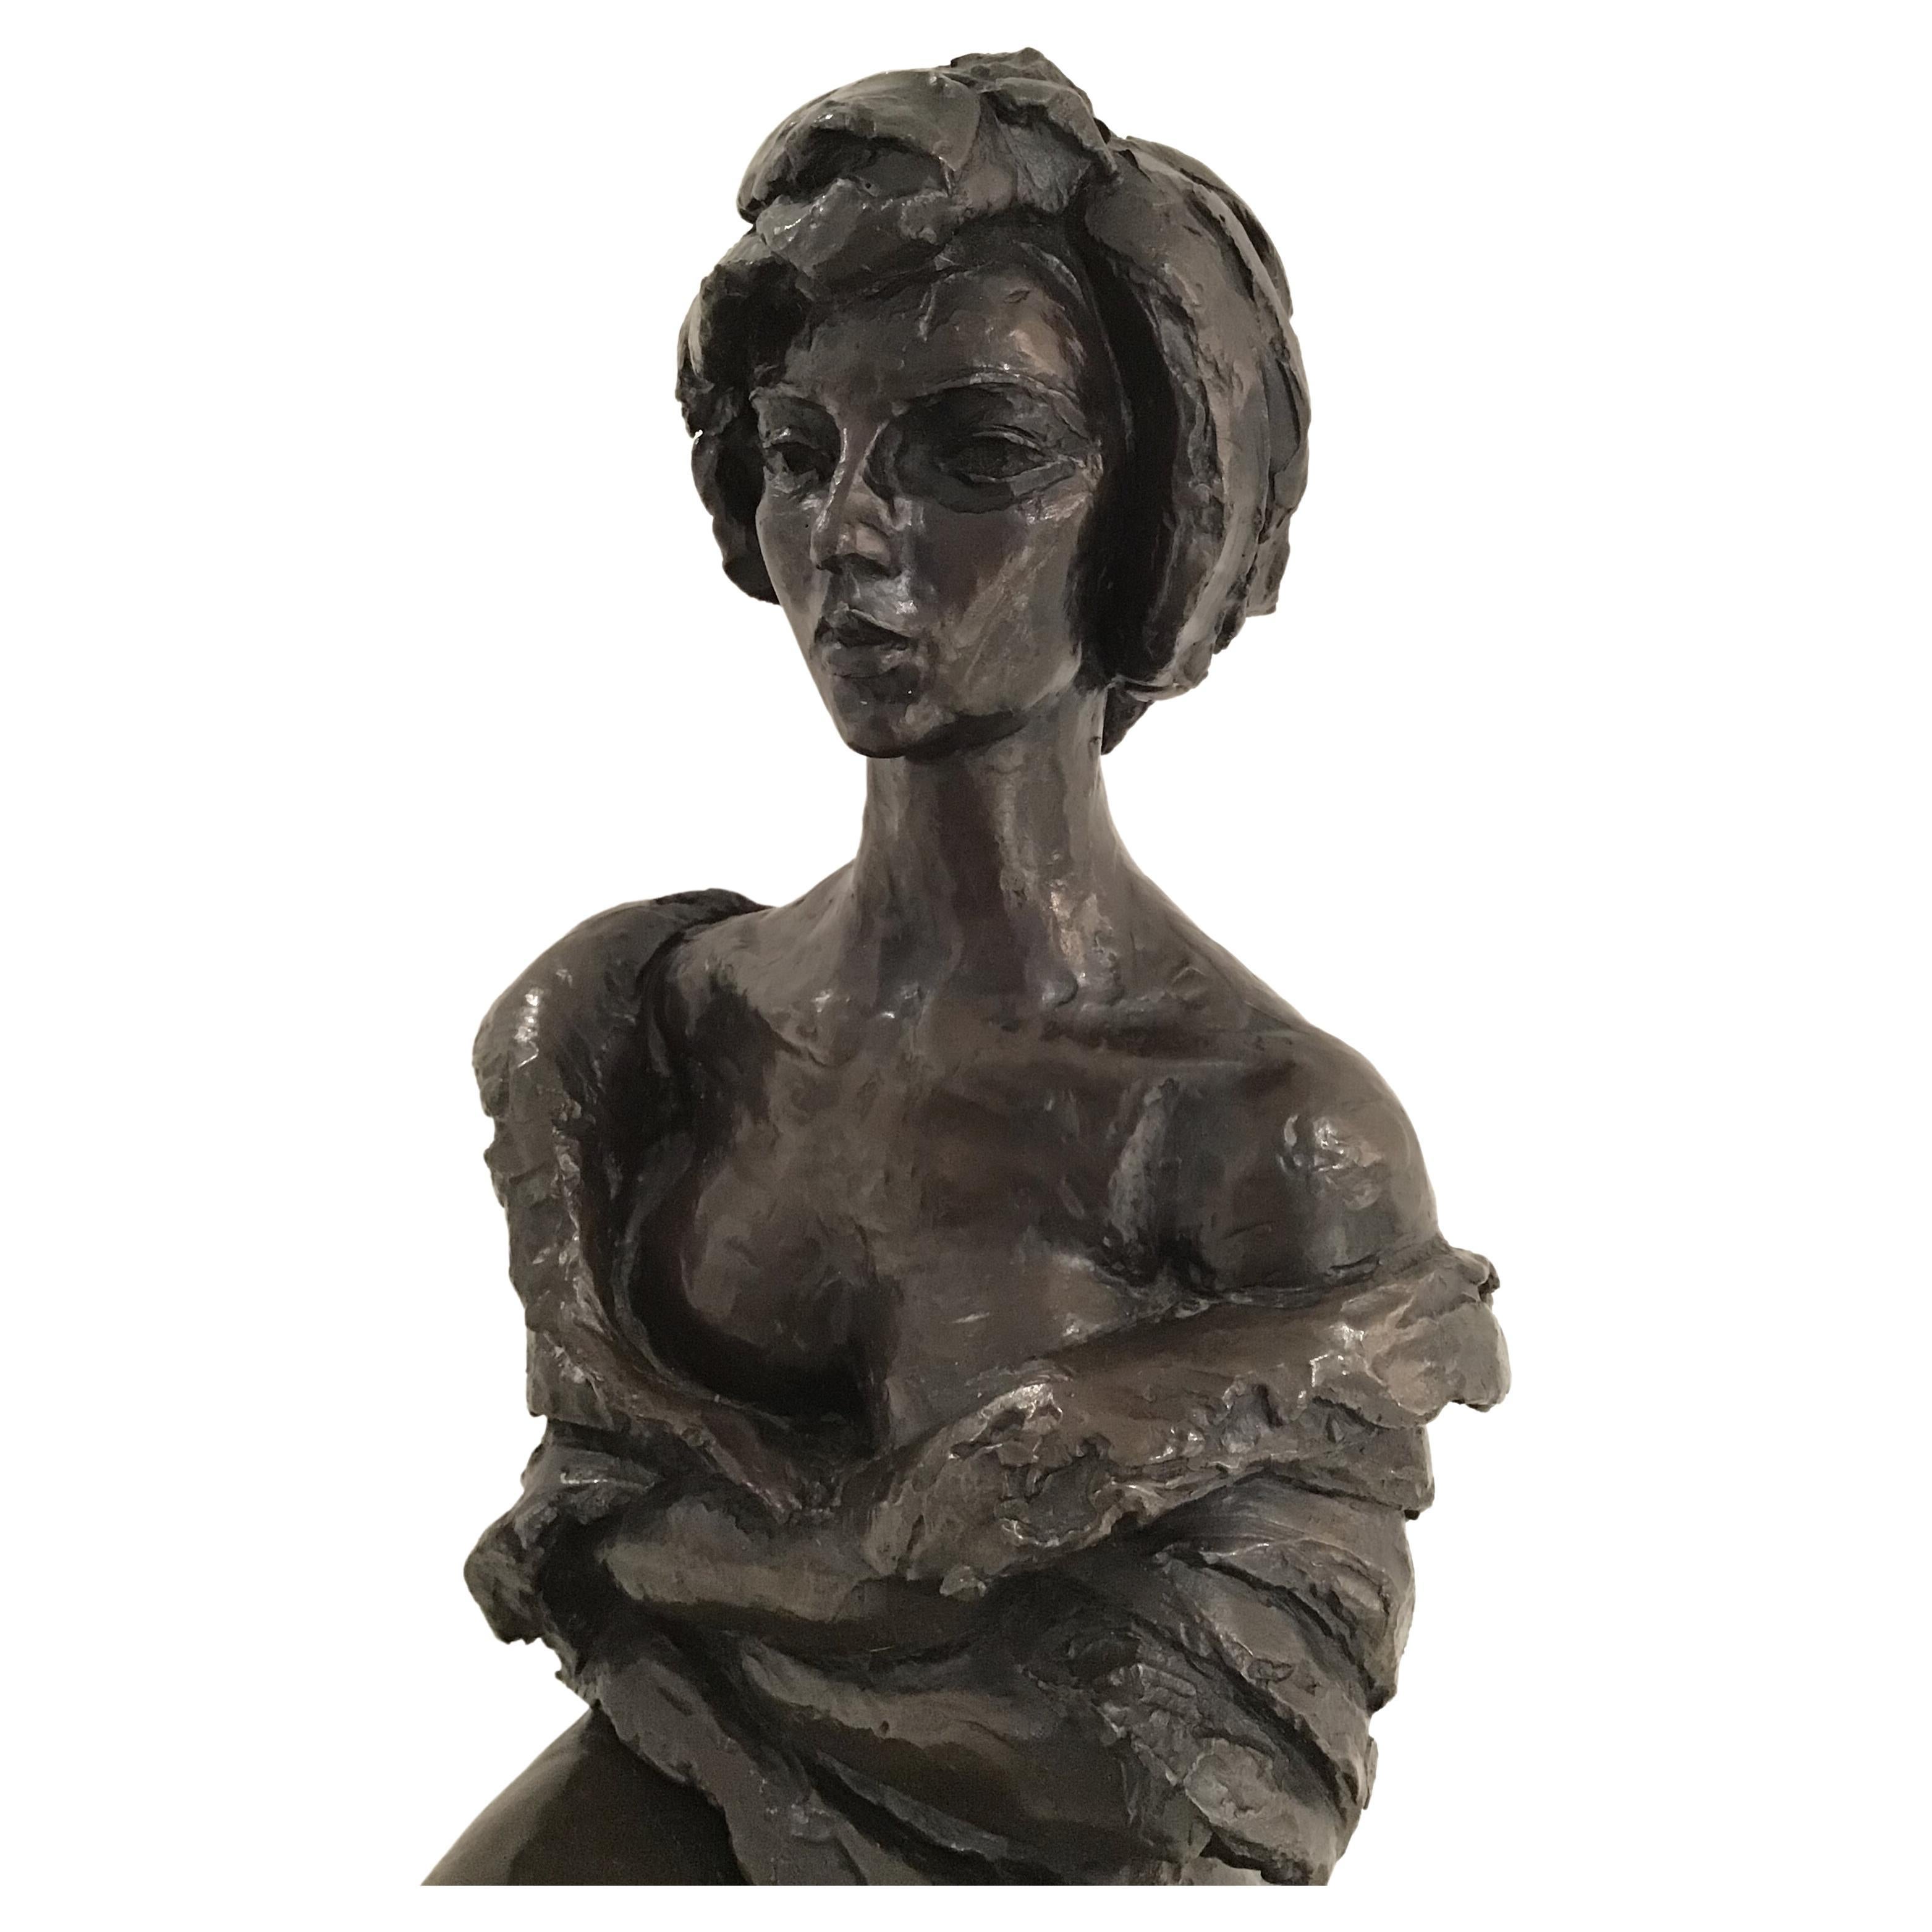 Magnificent patinated bronze sculpture on black marble base by American sculptor Charles Umlauf, signed, circa 1970.
Sculpting portrait of a seated woman. 
Umlauf was one of the premier sculptors in Texas in the second half of the 20th century,